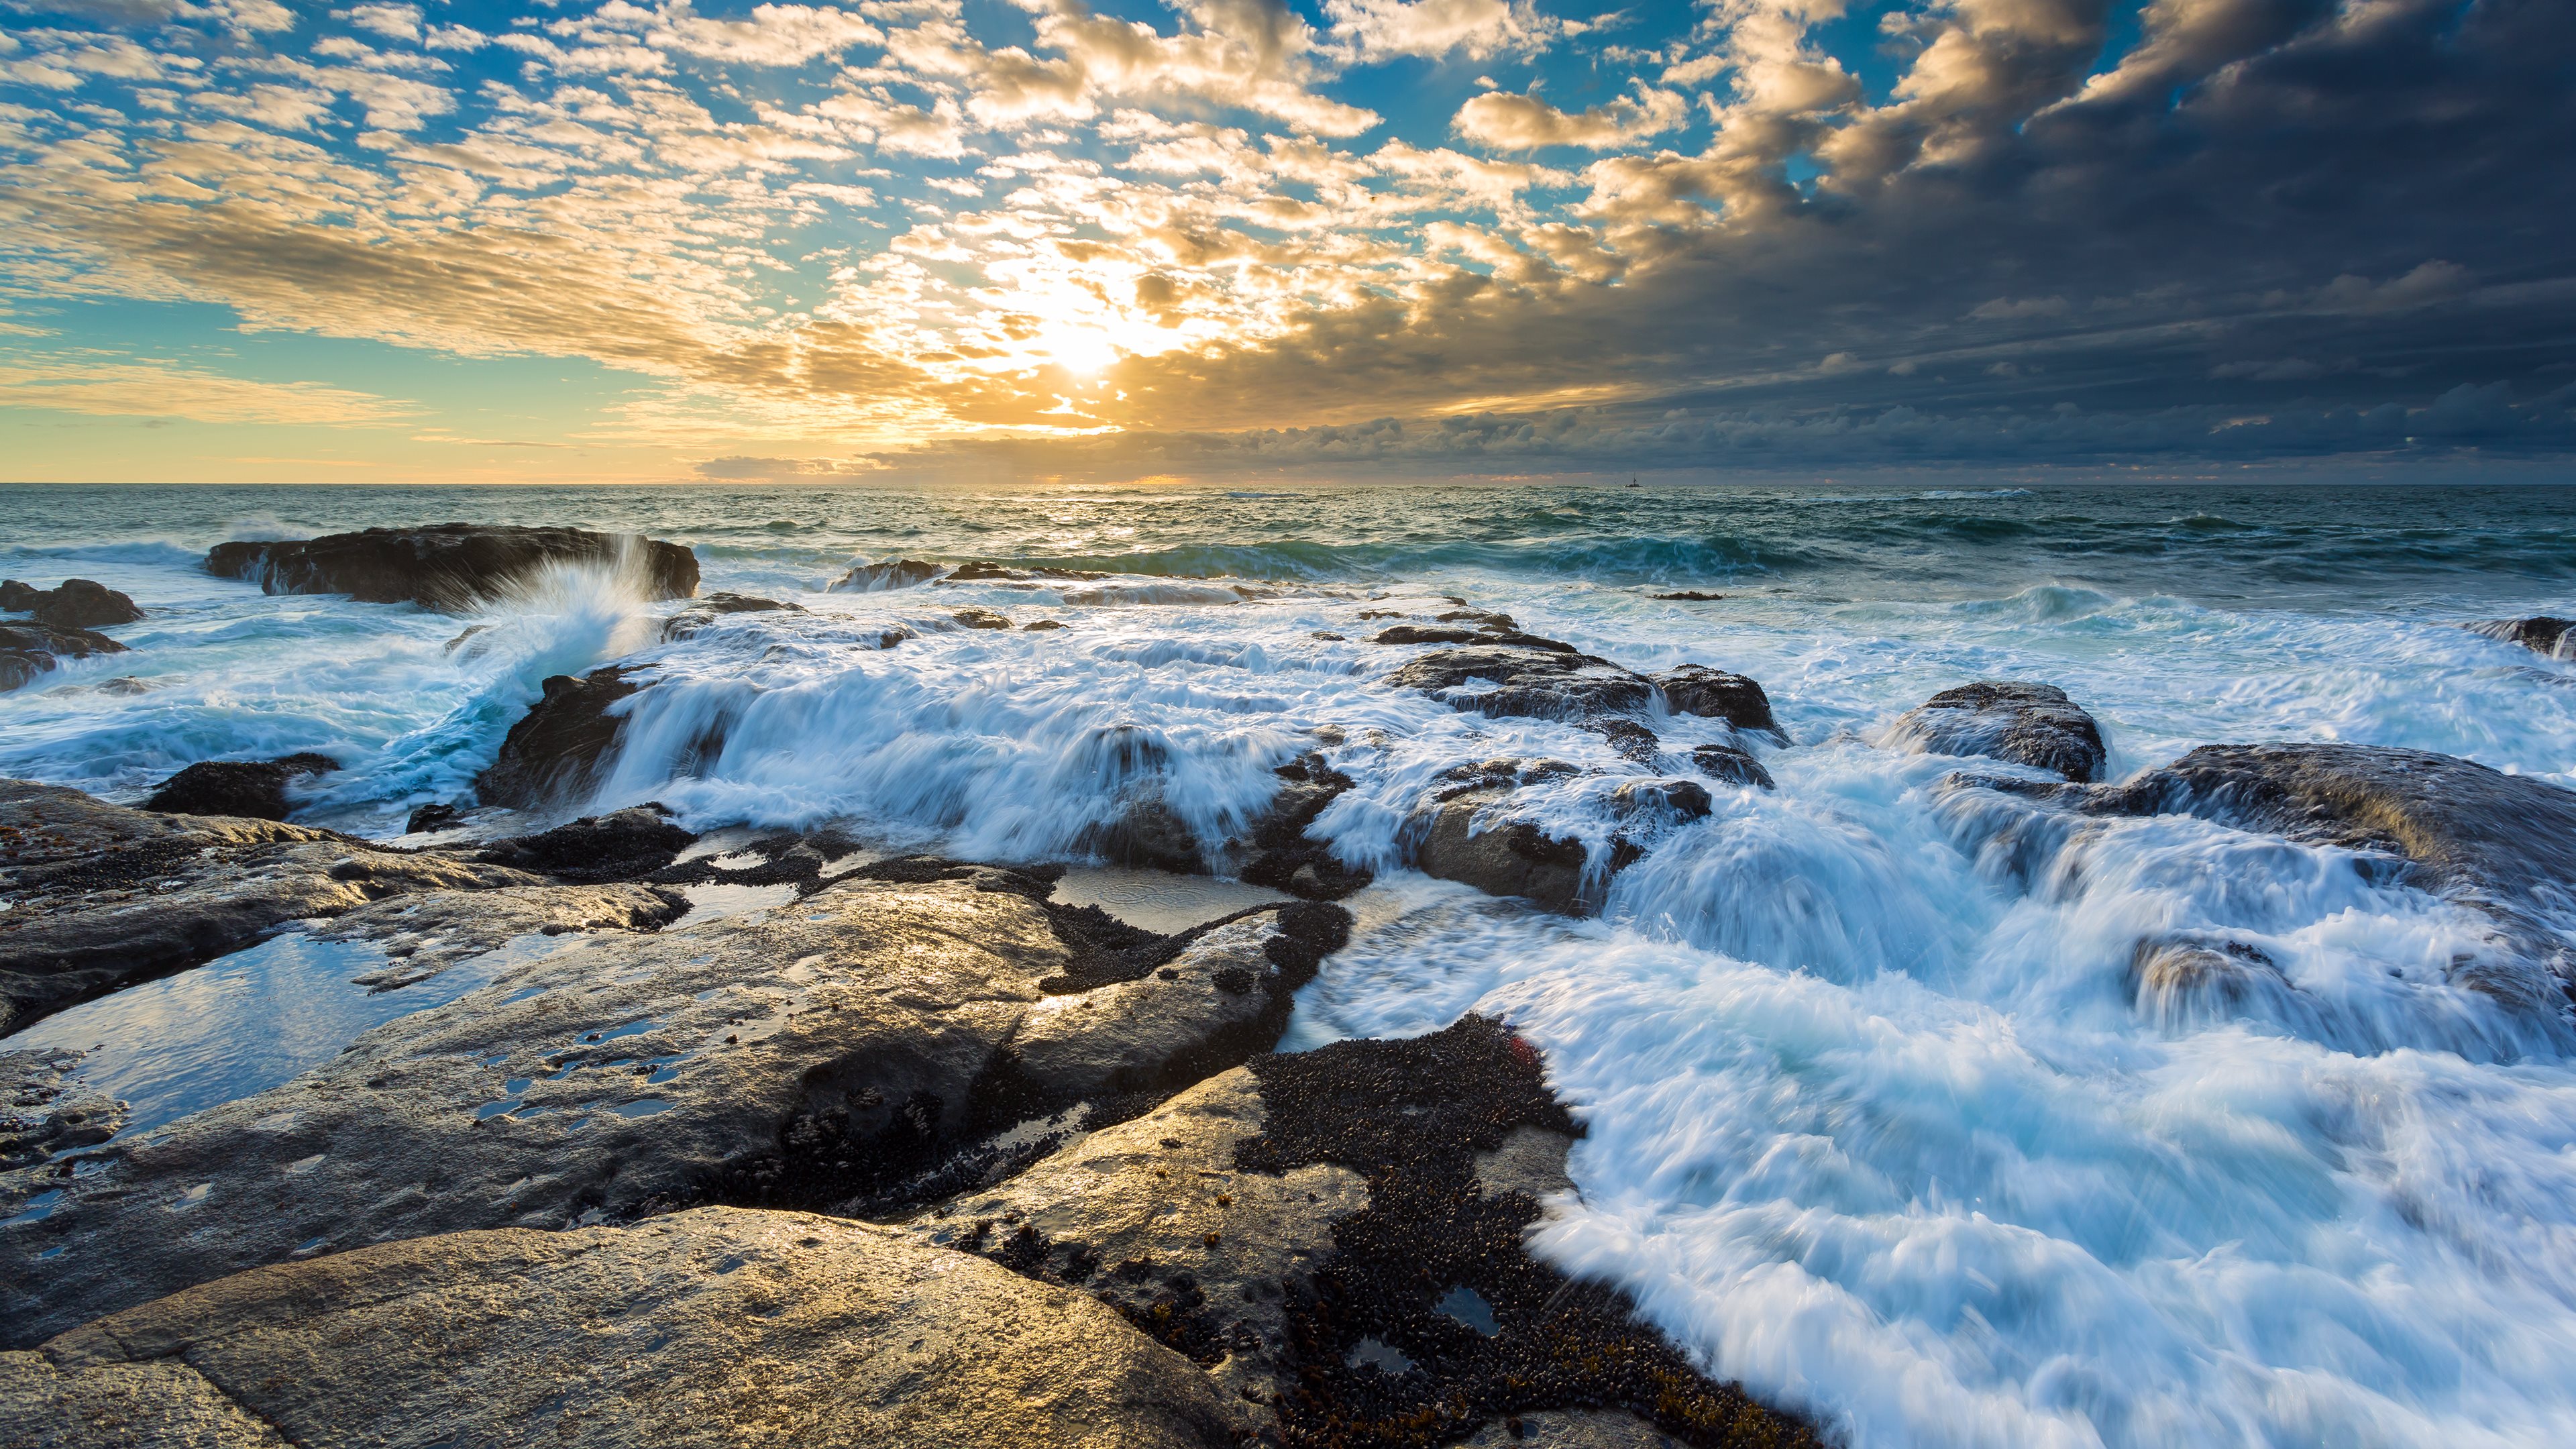 Nature Sea Waves Rocks Stones Sky Clouds Sunset Water Sunset Glow 3840x2160